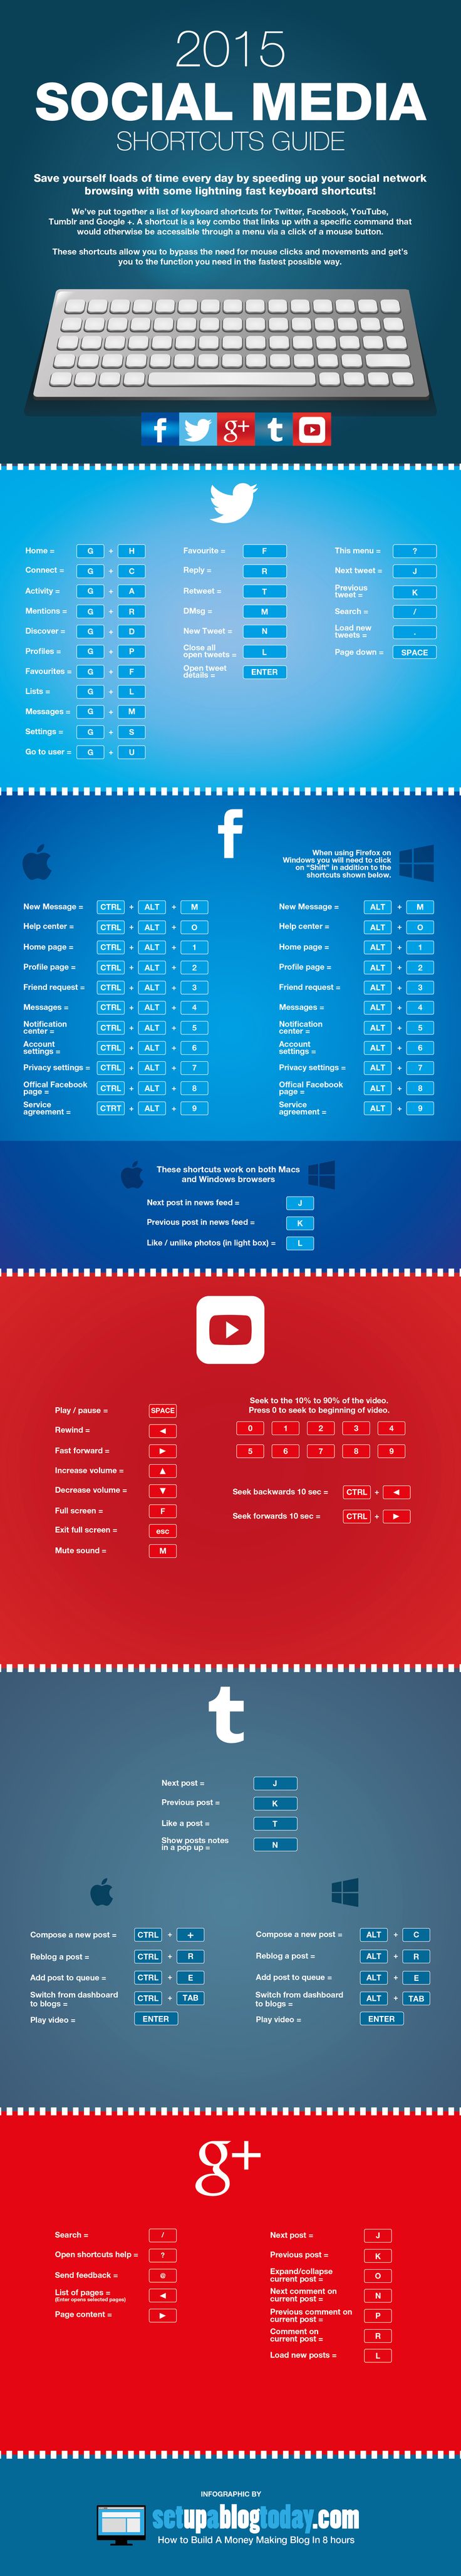 Marketing-Infographic-Infographic-2015-SocialMedia-Shortcuts-Guide.-Save-yourself-loads-of-time-eve Marketing Infographic : Infographic: 2015 #SocialMedia Shortcuts Guide.  Save yourself loads of time eve...